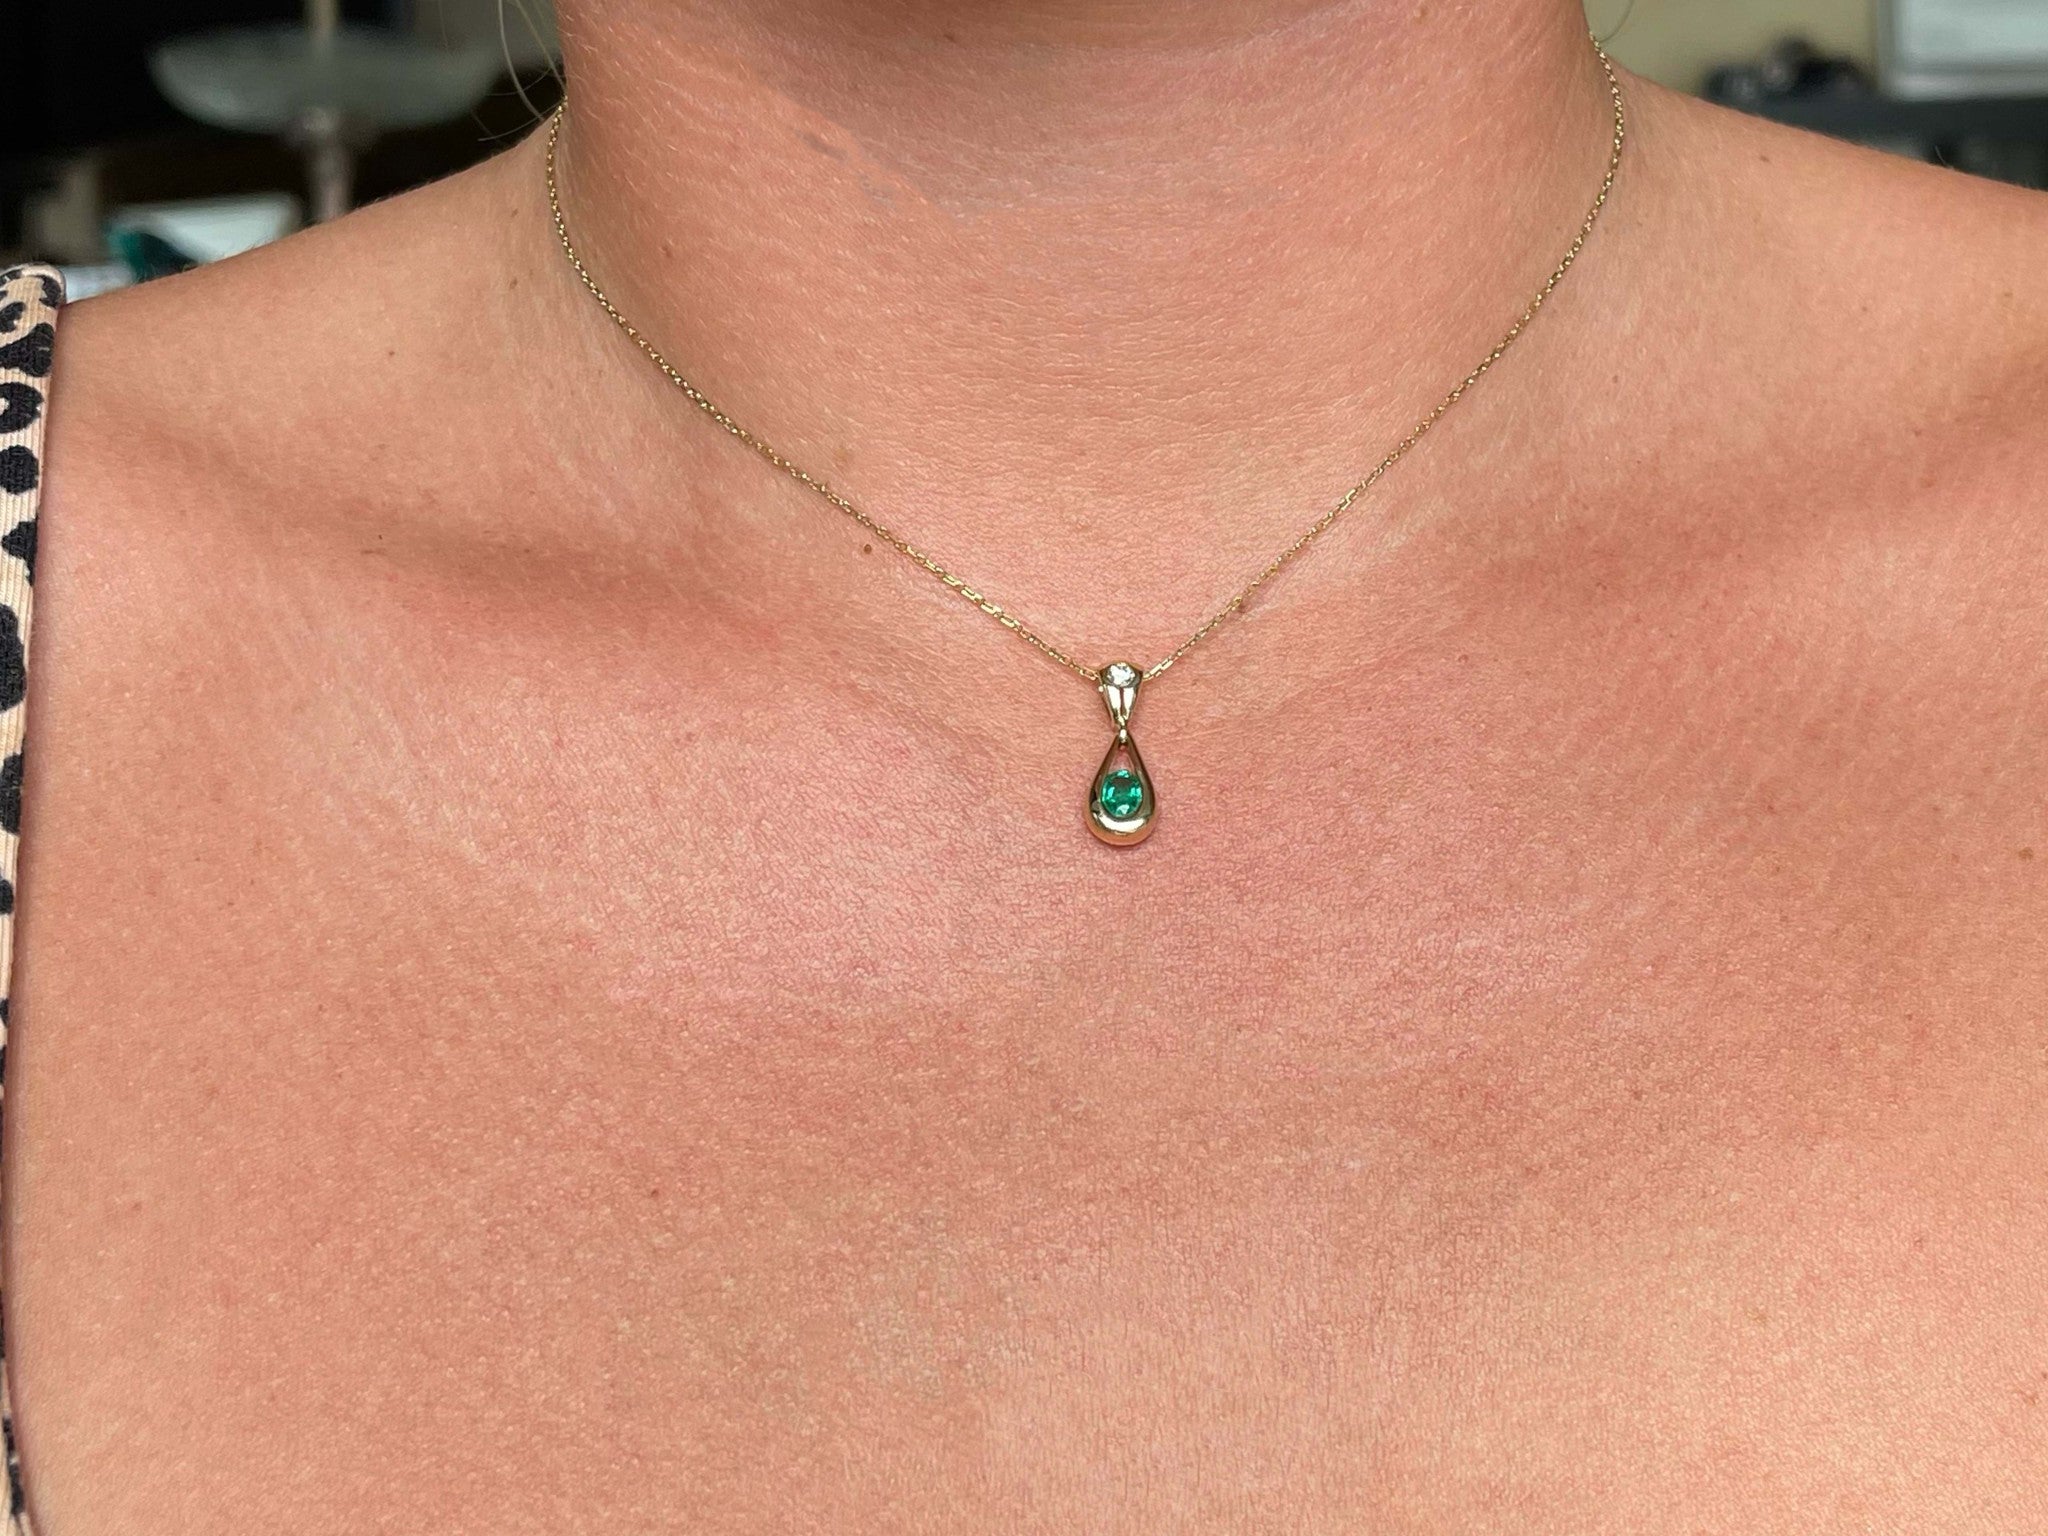 Dangly Emerald Diamond Necklace Solid 18K Yellow Gold